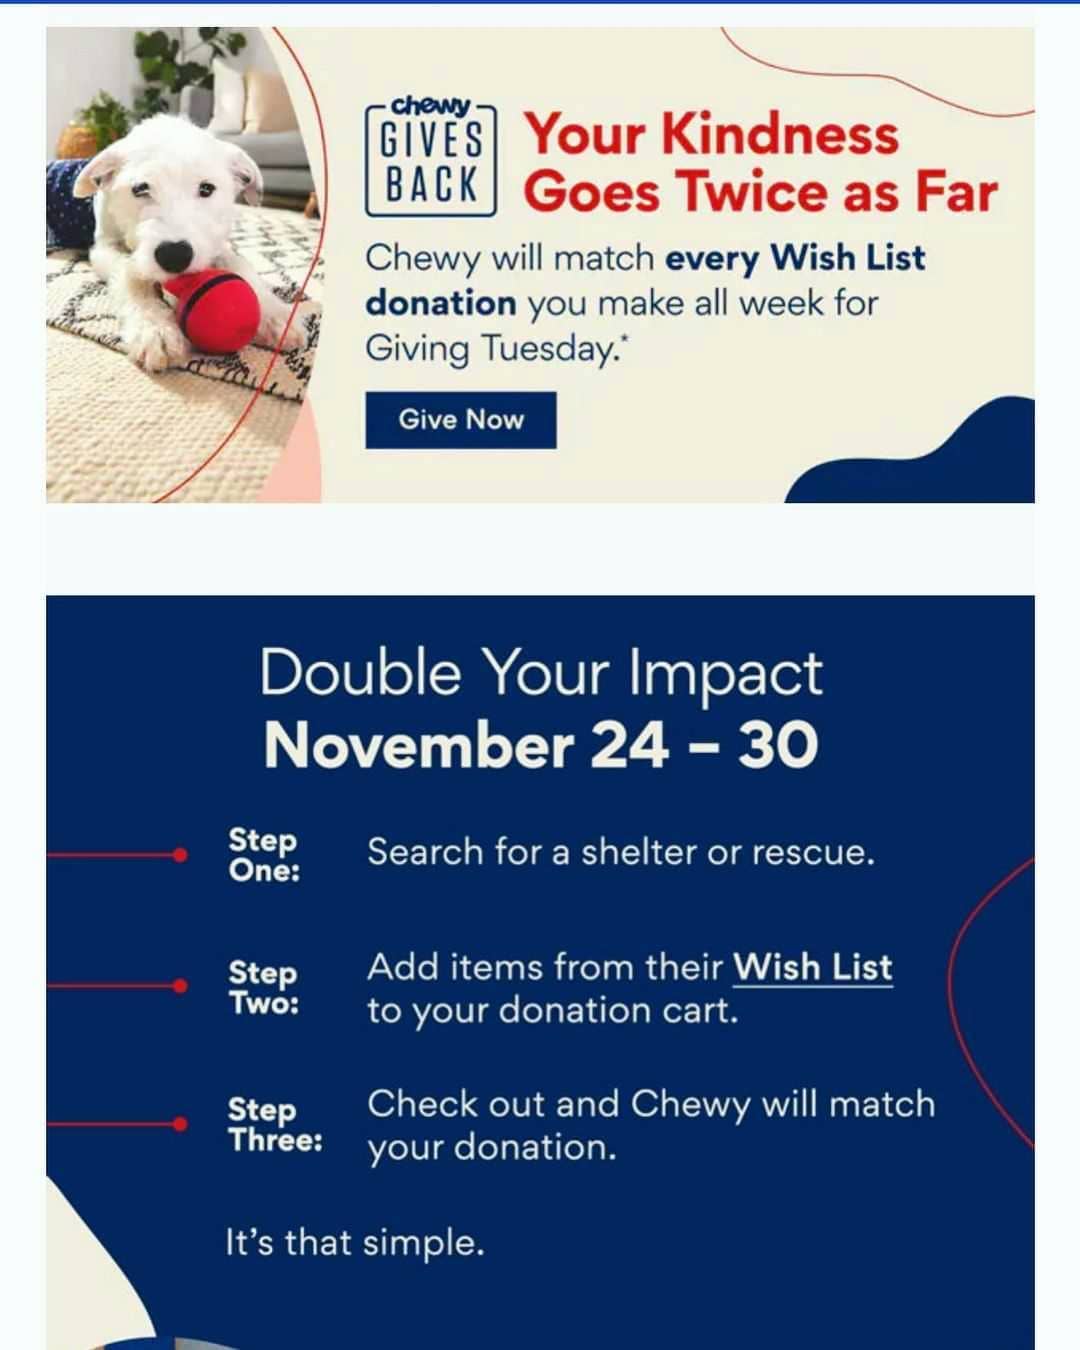 @chewy
Will match wishlist purchases until <a target='_blank' href='https://www.instagram.com/explore/tags/givingtuesday/'>#givingtuesday</a>!

❤ Our wishlist link is in our bio ❤

<a target='_blank' href='https://www.instagram.com/explore/tags/matchingdonations/'>#matchingdonations</a> <a target='_blank' href='https://www.instagram.com/explore/tags/chewygivesback/'>#chewygivesback</a> <a target='_blank' href='https://www.instagram.com/explore/tags/rescuecats/'>#rescuecats</a> <a target='_blank' href='https://www.instagram.com/explore/tags/supplies/'>#supplies</a> <a target='_blank' href='https://www.instagram.com/explore/tags/cattoys/'>#cattoys</a> <a target='_blank' href='https://www.instagram.com/explore/tags/donations/'>#donations</a>